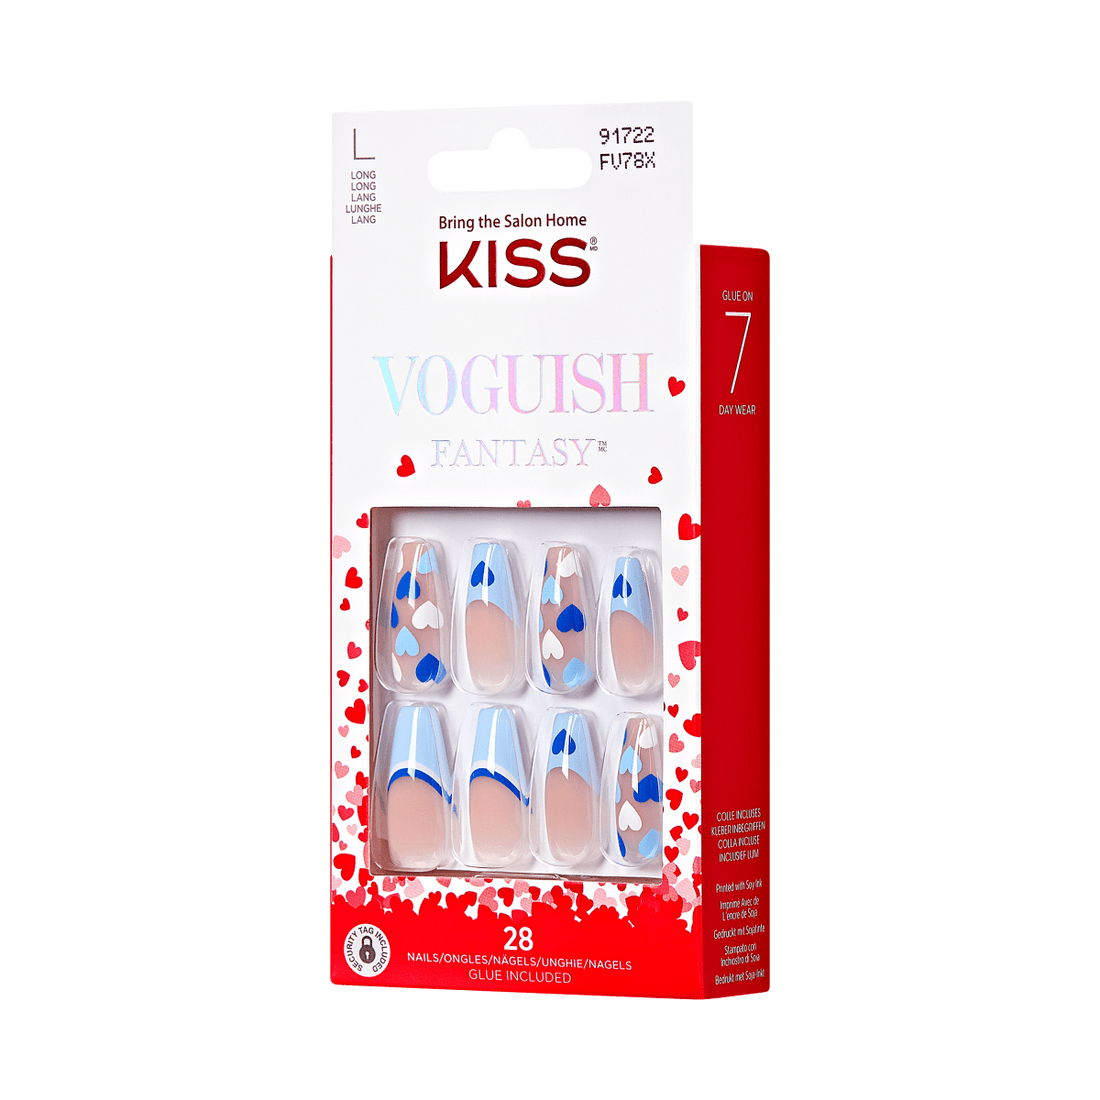 KISS Voguish Fantasy, Press-On Nails, Dinner for 2, Blue, Long Coffin, 28ct